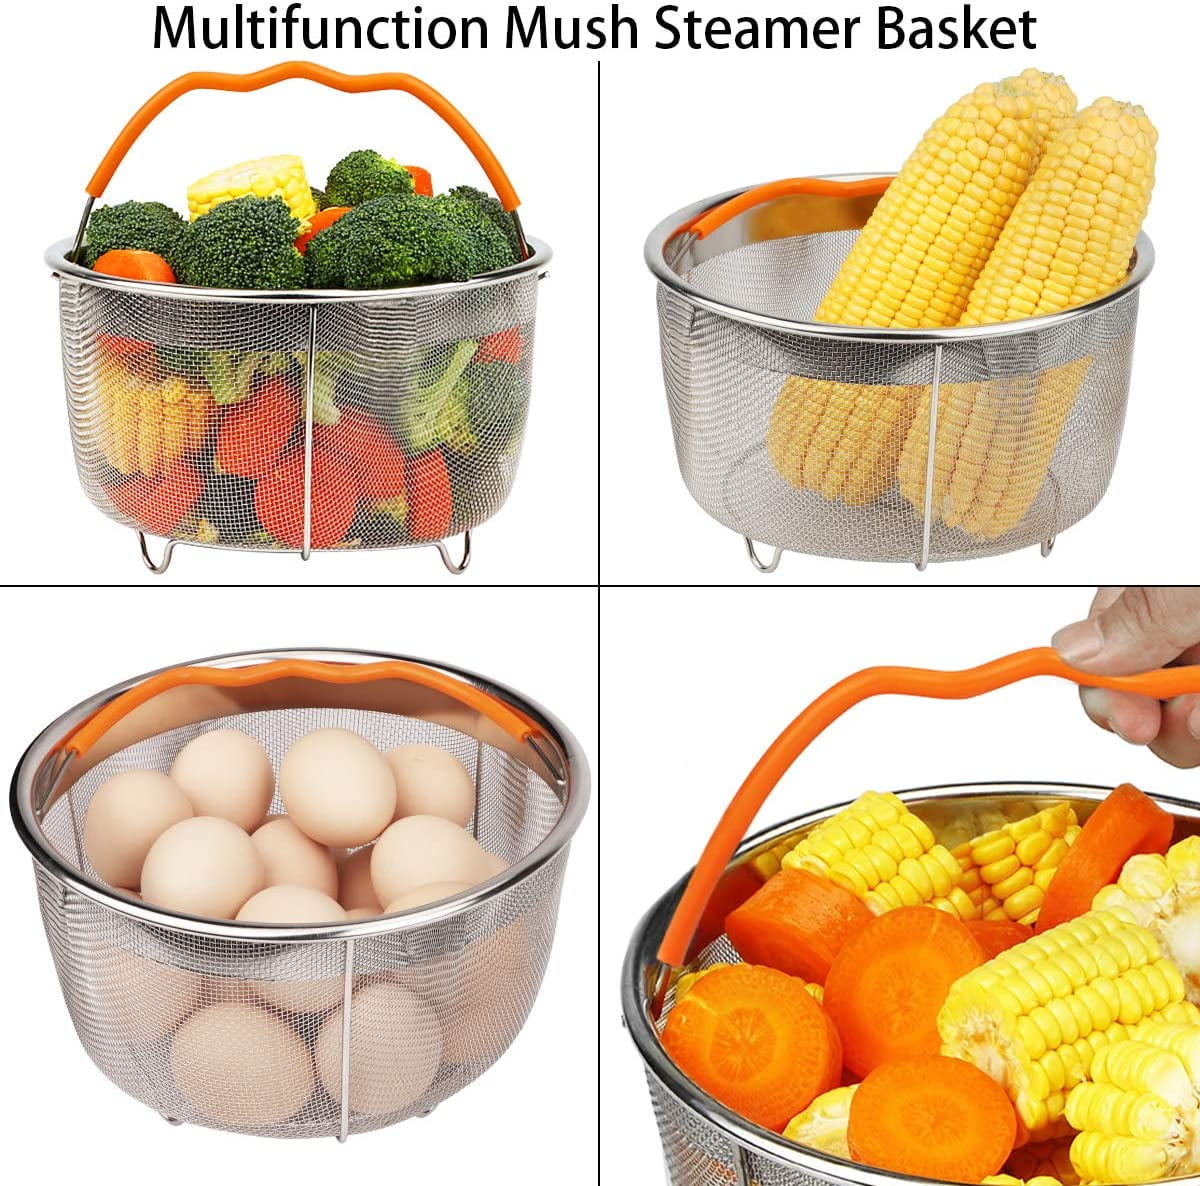 Fitnate 8 Pack Instant Pot Accessories Steamer Basket Egg Bites Mold Egg Steamer Rack Instant Pot Pressure Cooker - Set of 8 - White